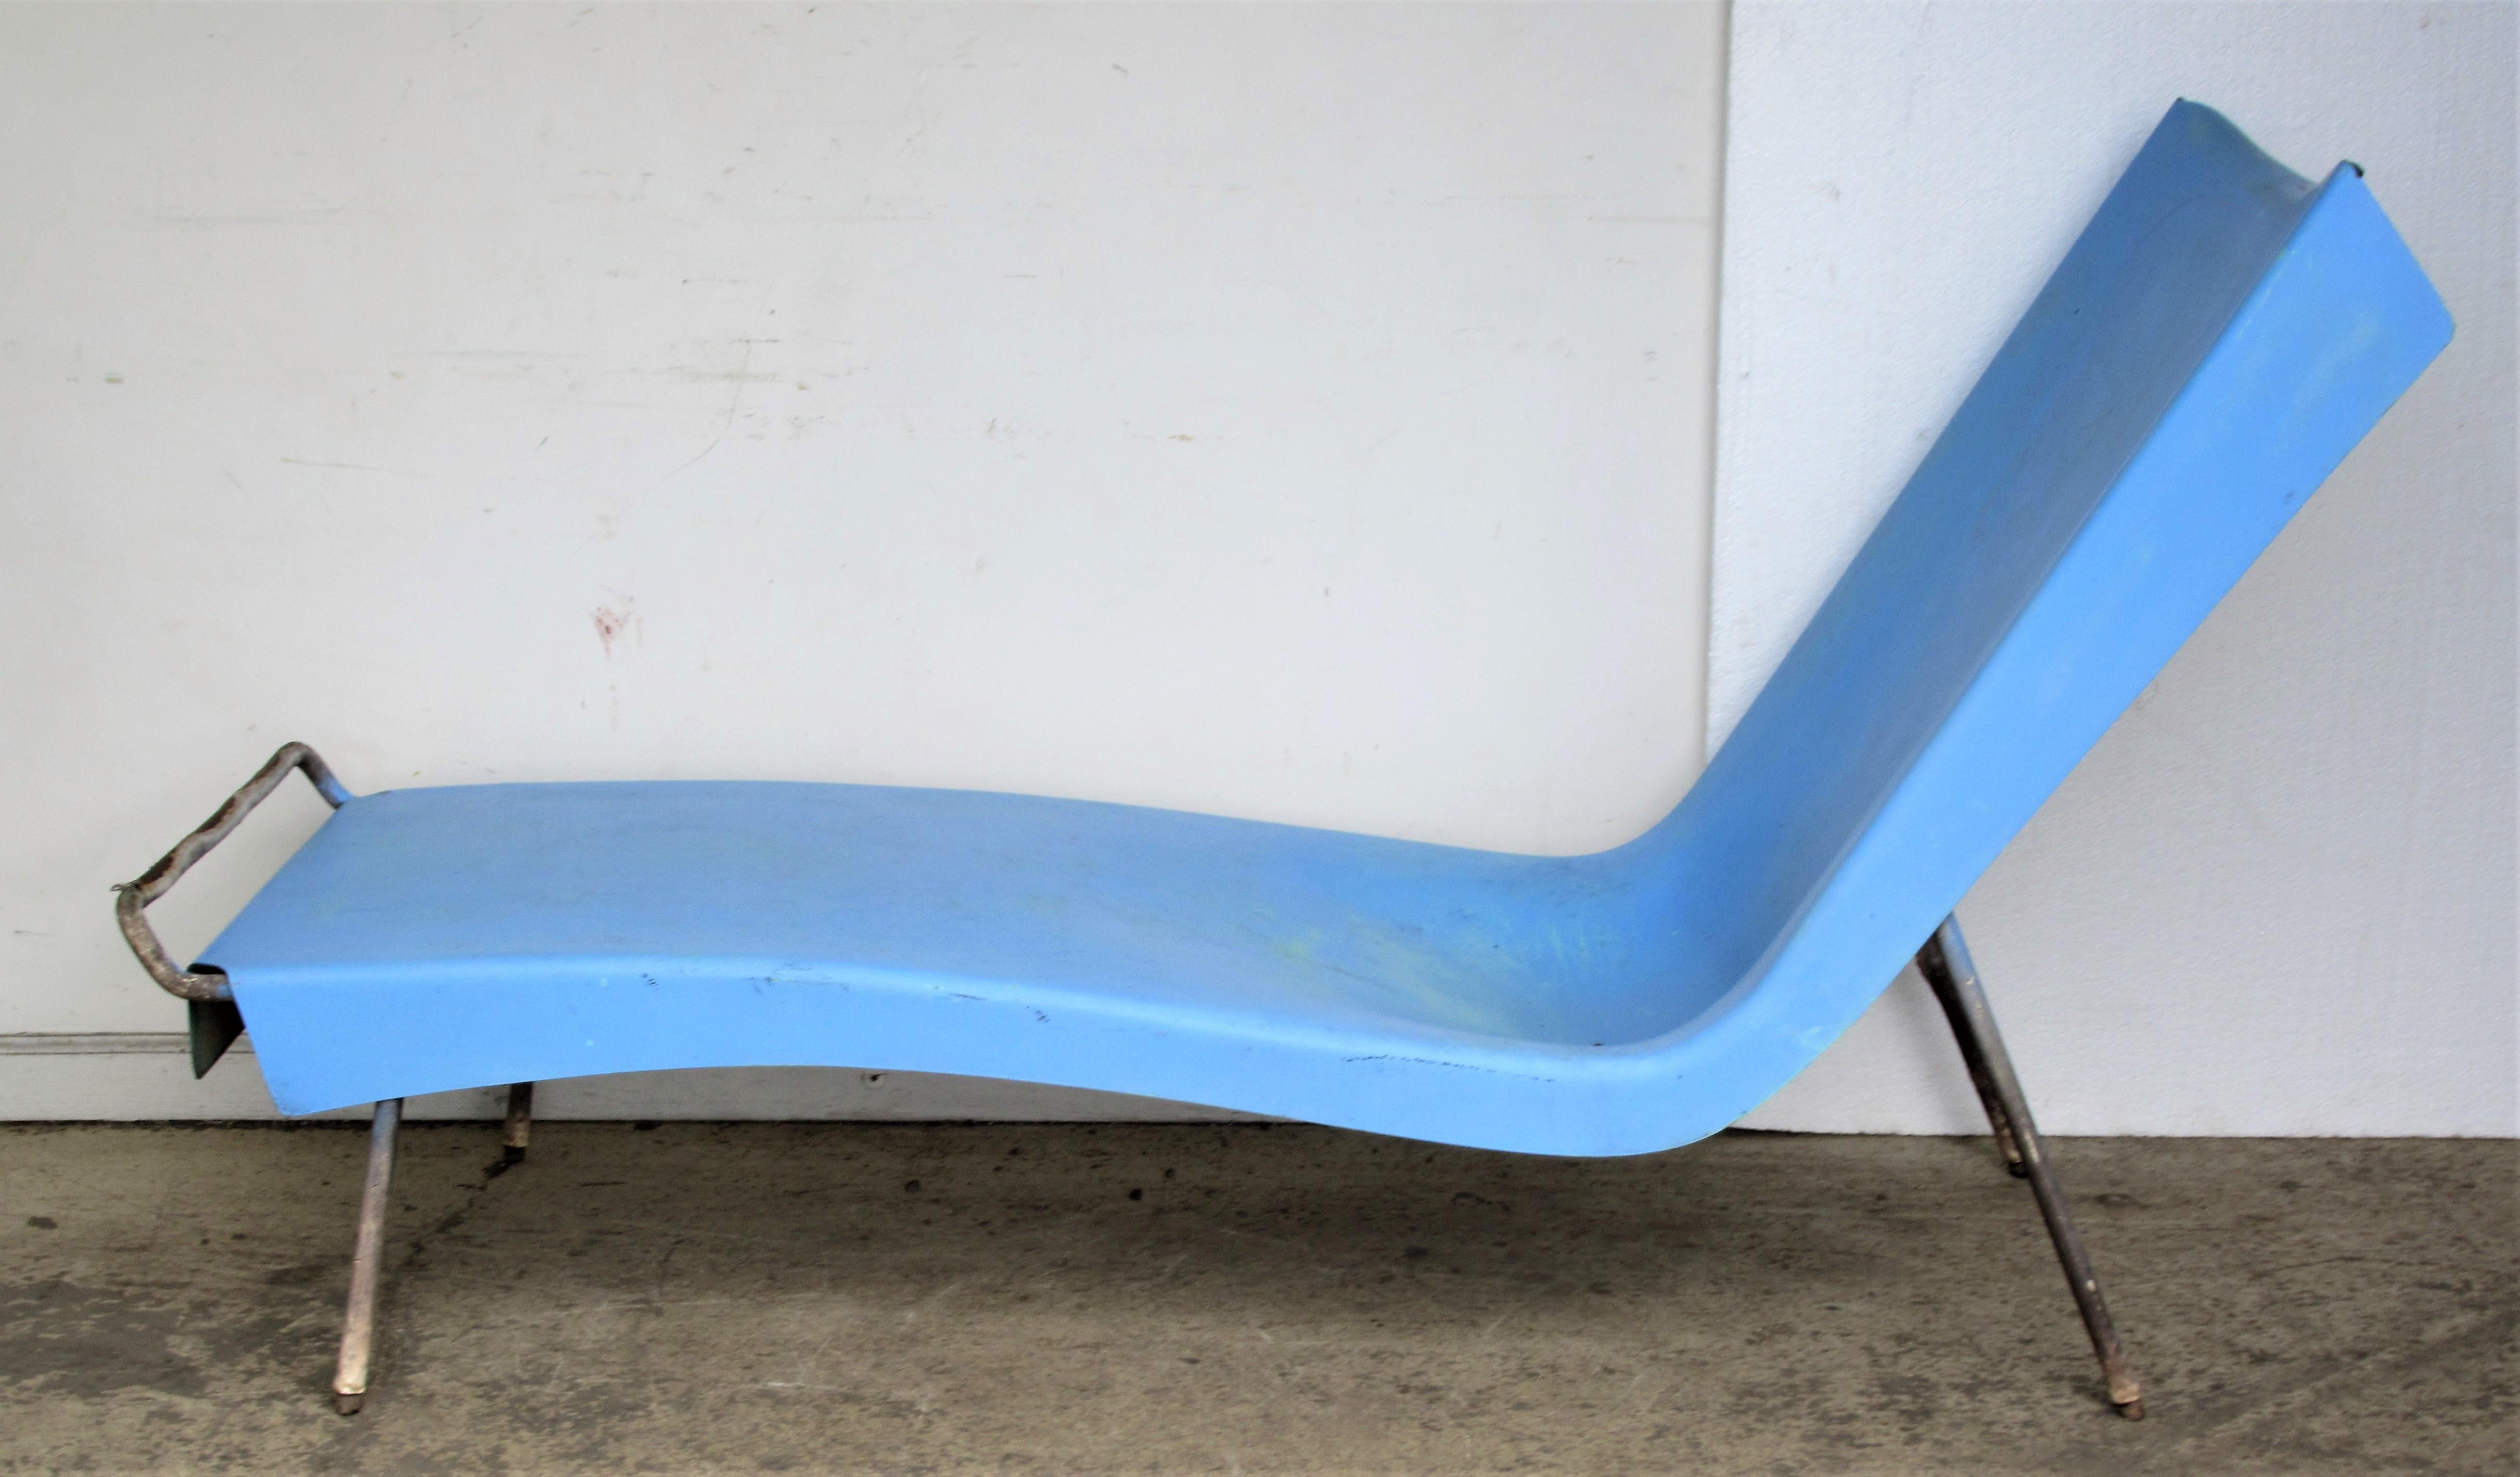 California modernist style sculptural fiberglass chaise lounge with rubber coated tubular steel framework. For exterior pool side patio garden. Great looking, circa 1950s. Look at all pictures and read condition report in comment section.